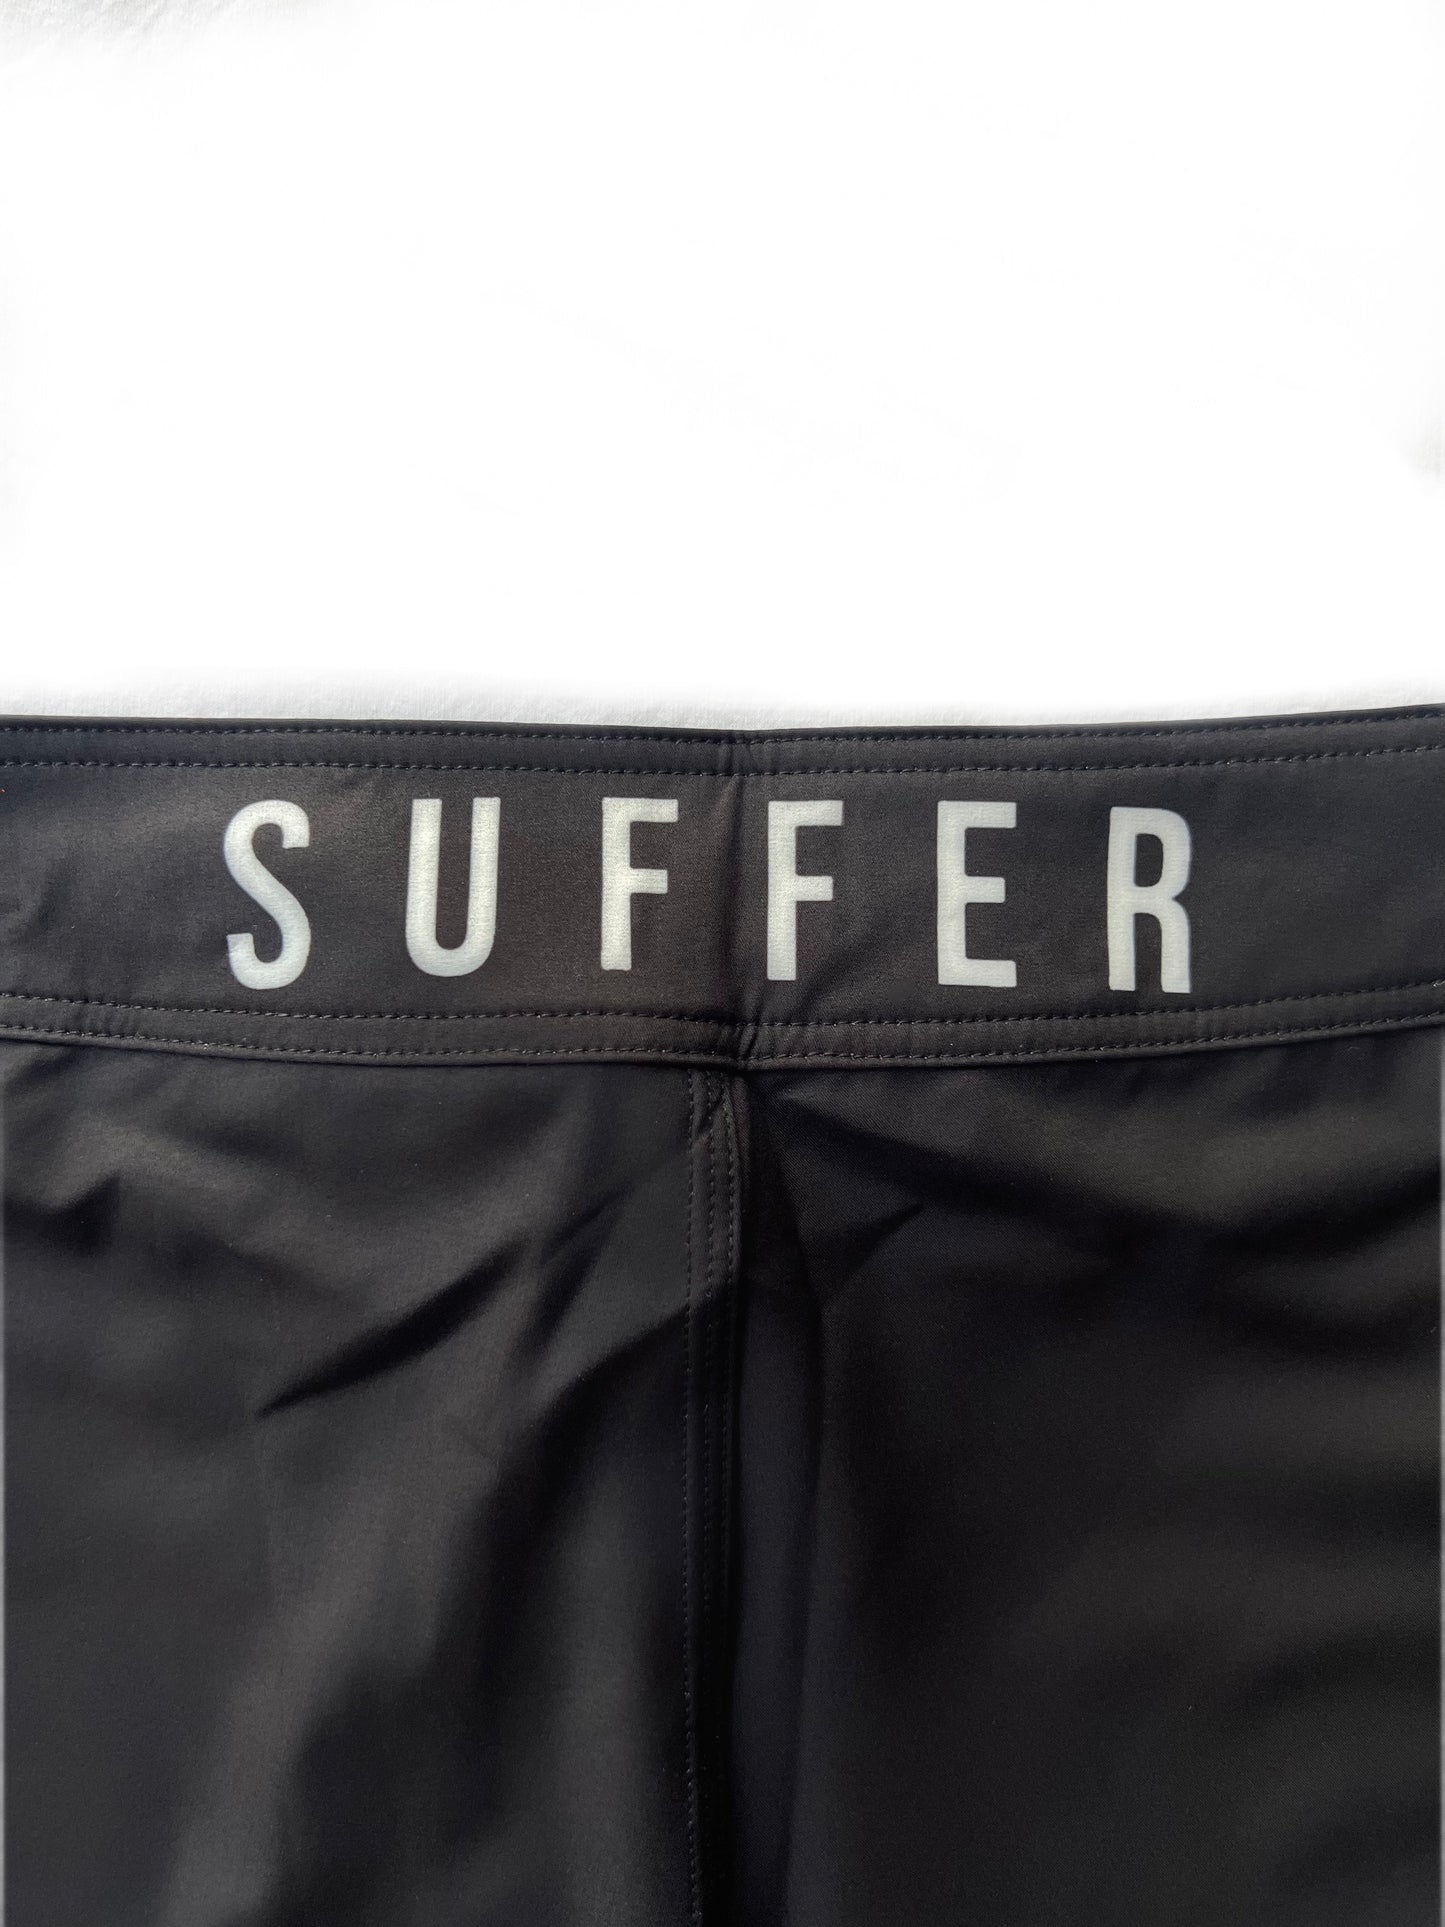 SUFFER Floral